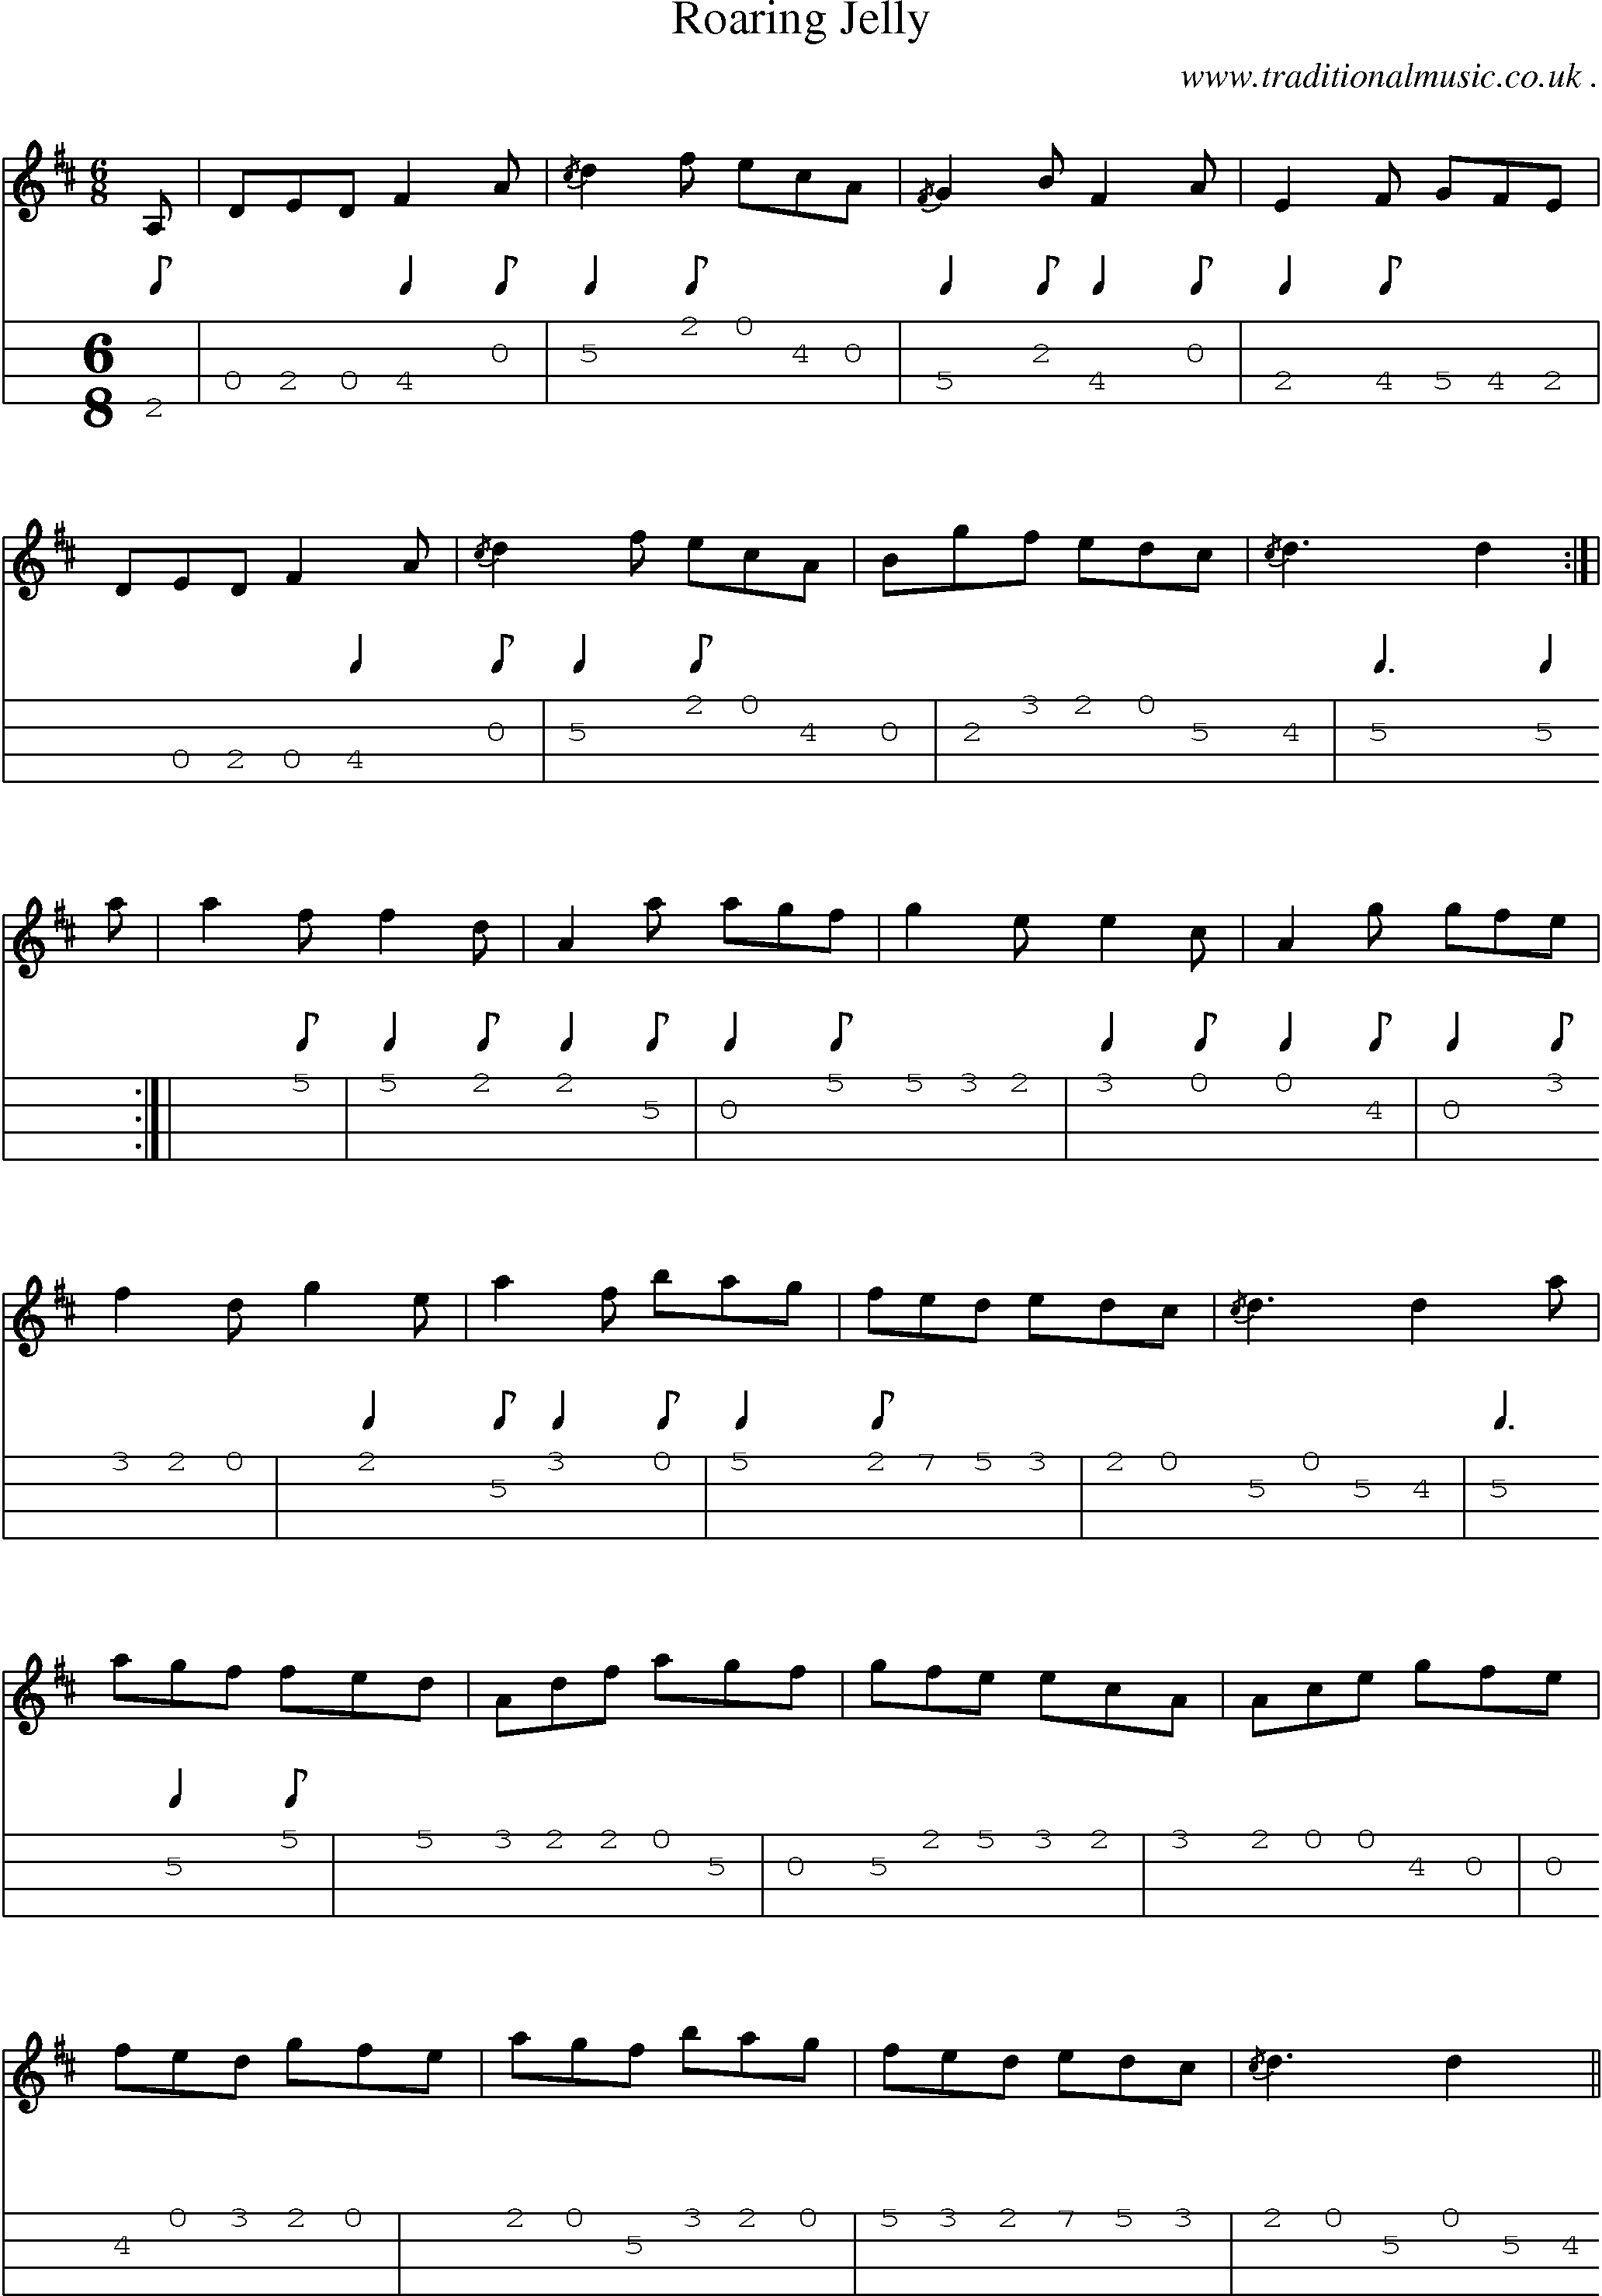 Sheet-music  score, Chords and Mandolin Tabs for Roaring Jelly